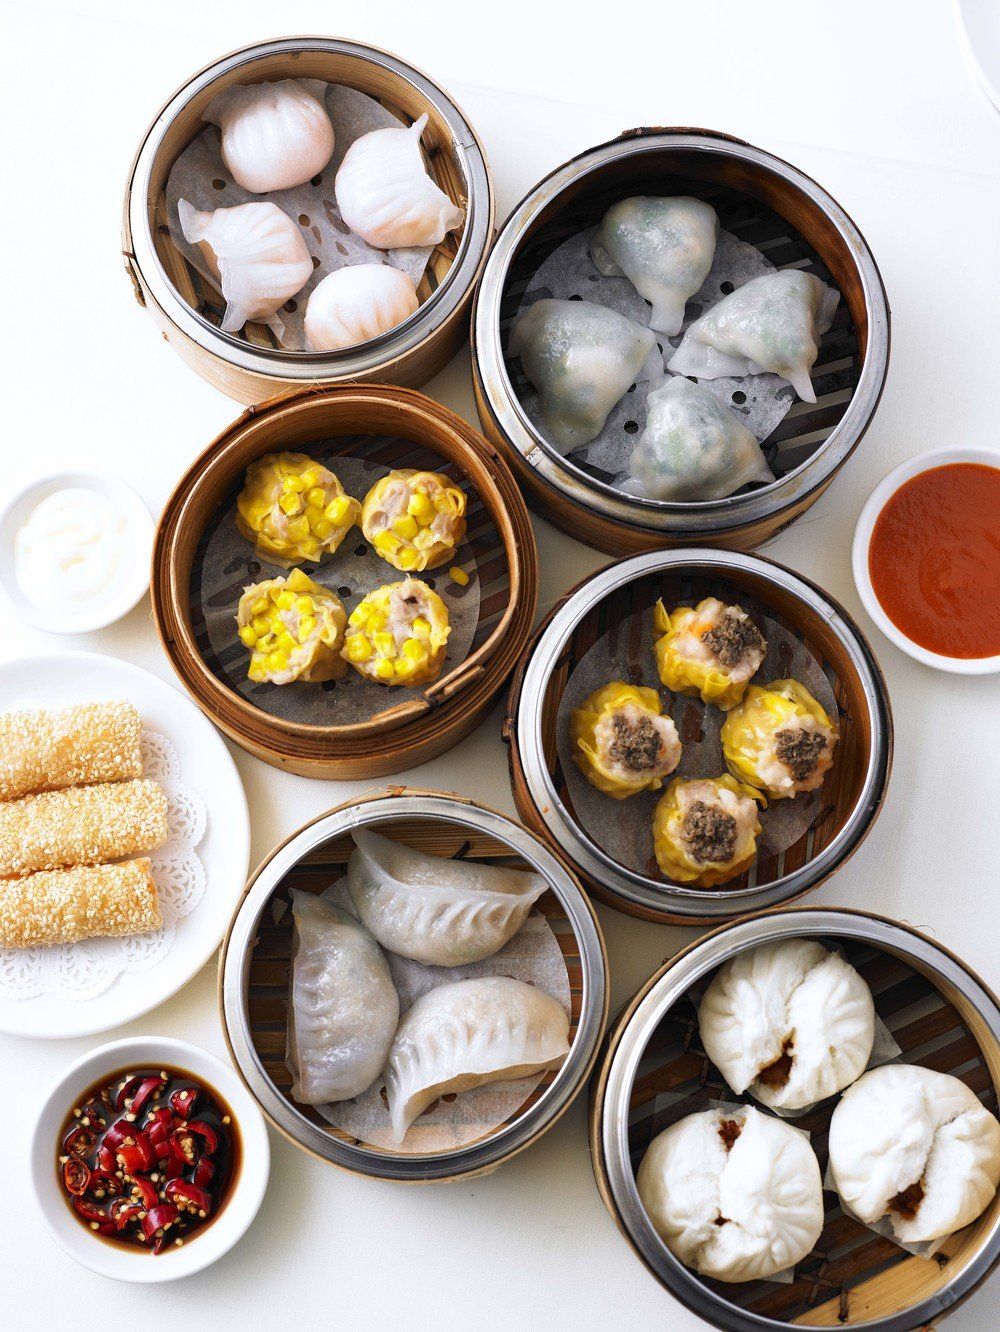 Check out these 6 dim sum restaurants in Hong Kong